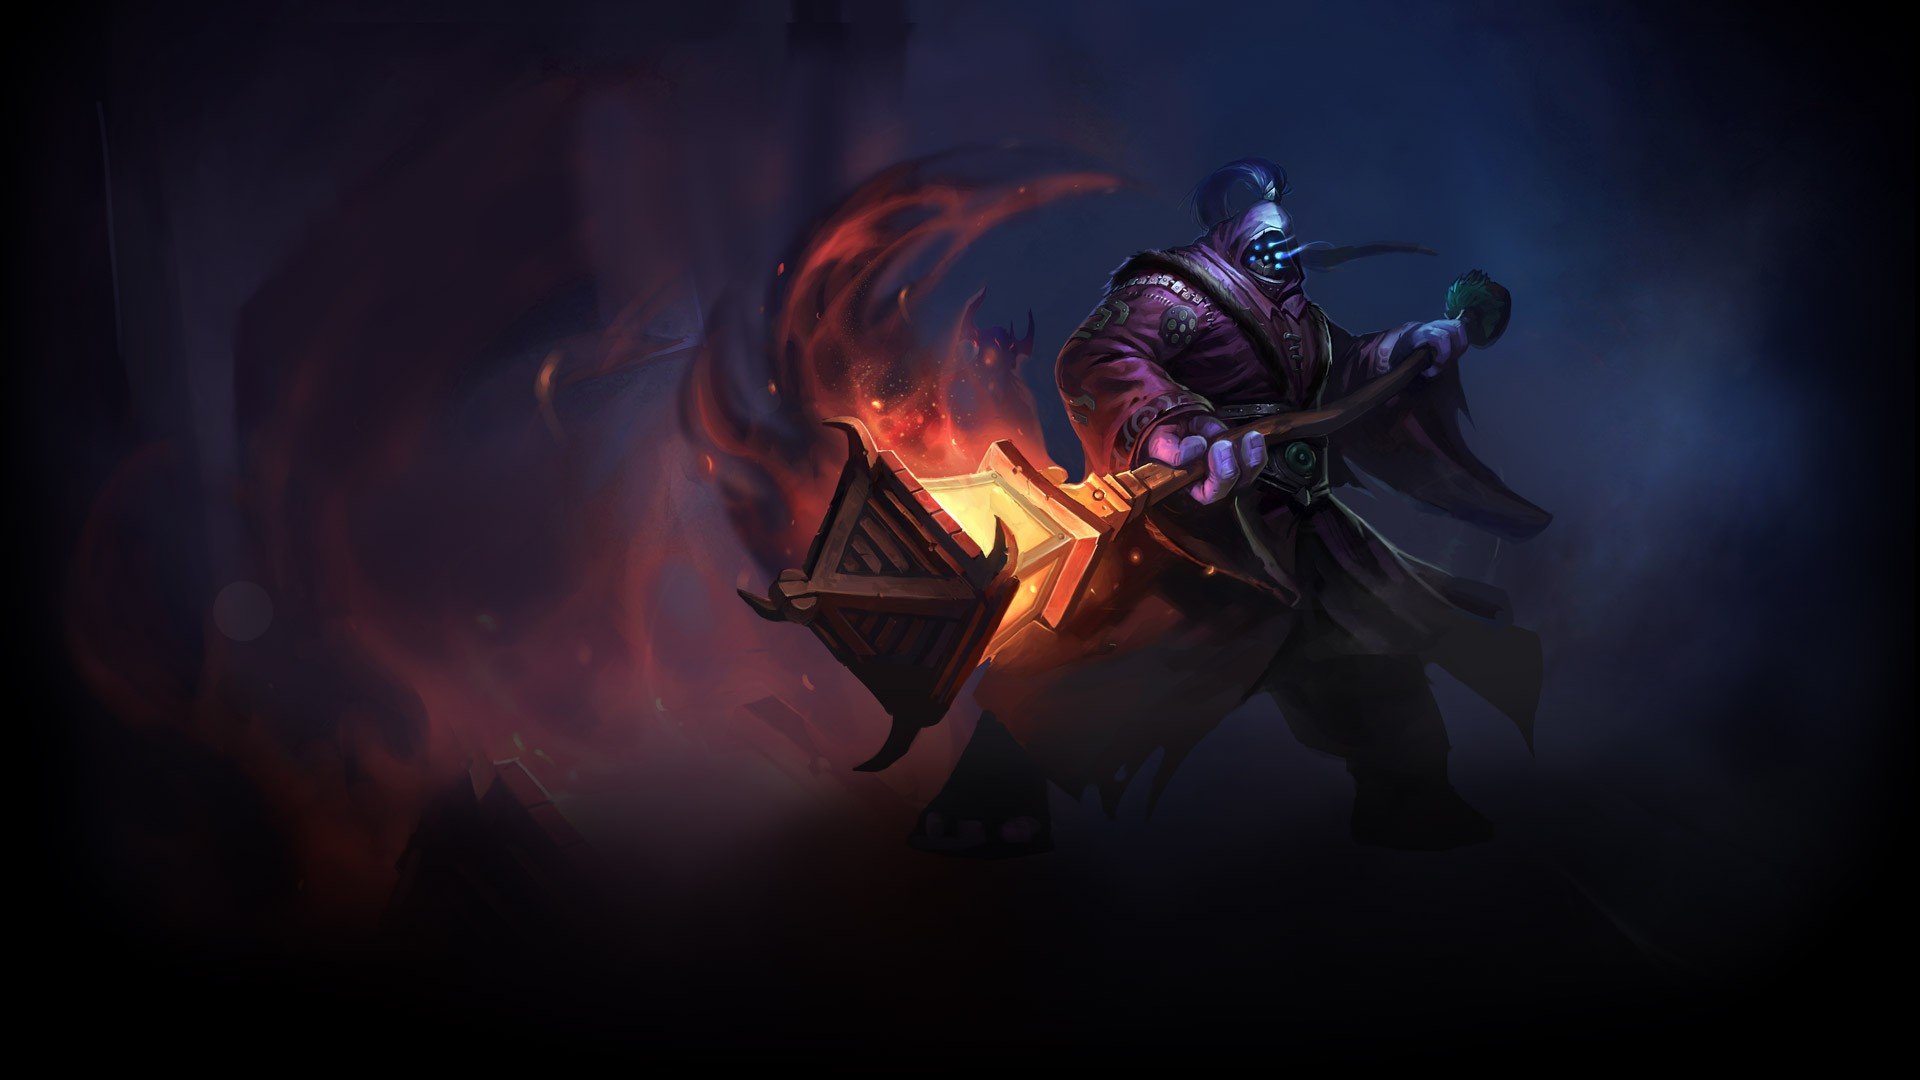 Download full hd 1920x1080 Jax (League Of Legends) PC background ID:171808 for free